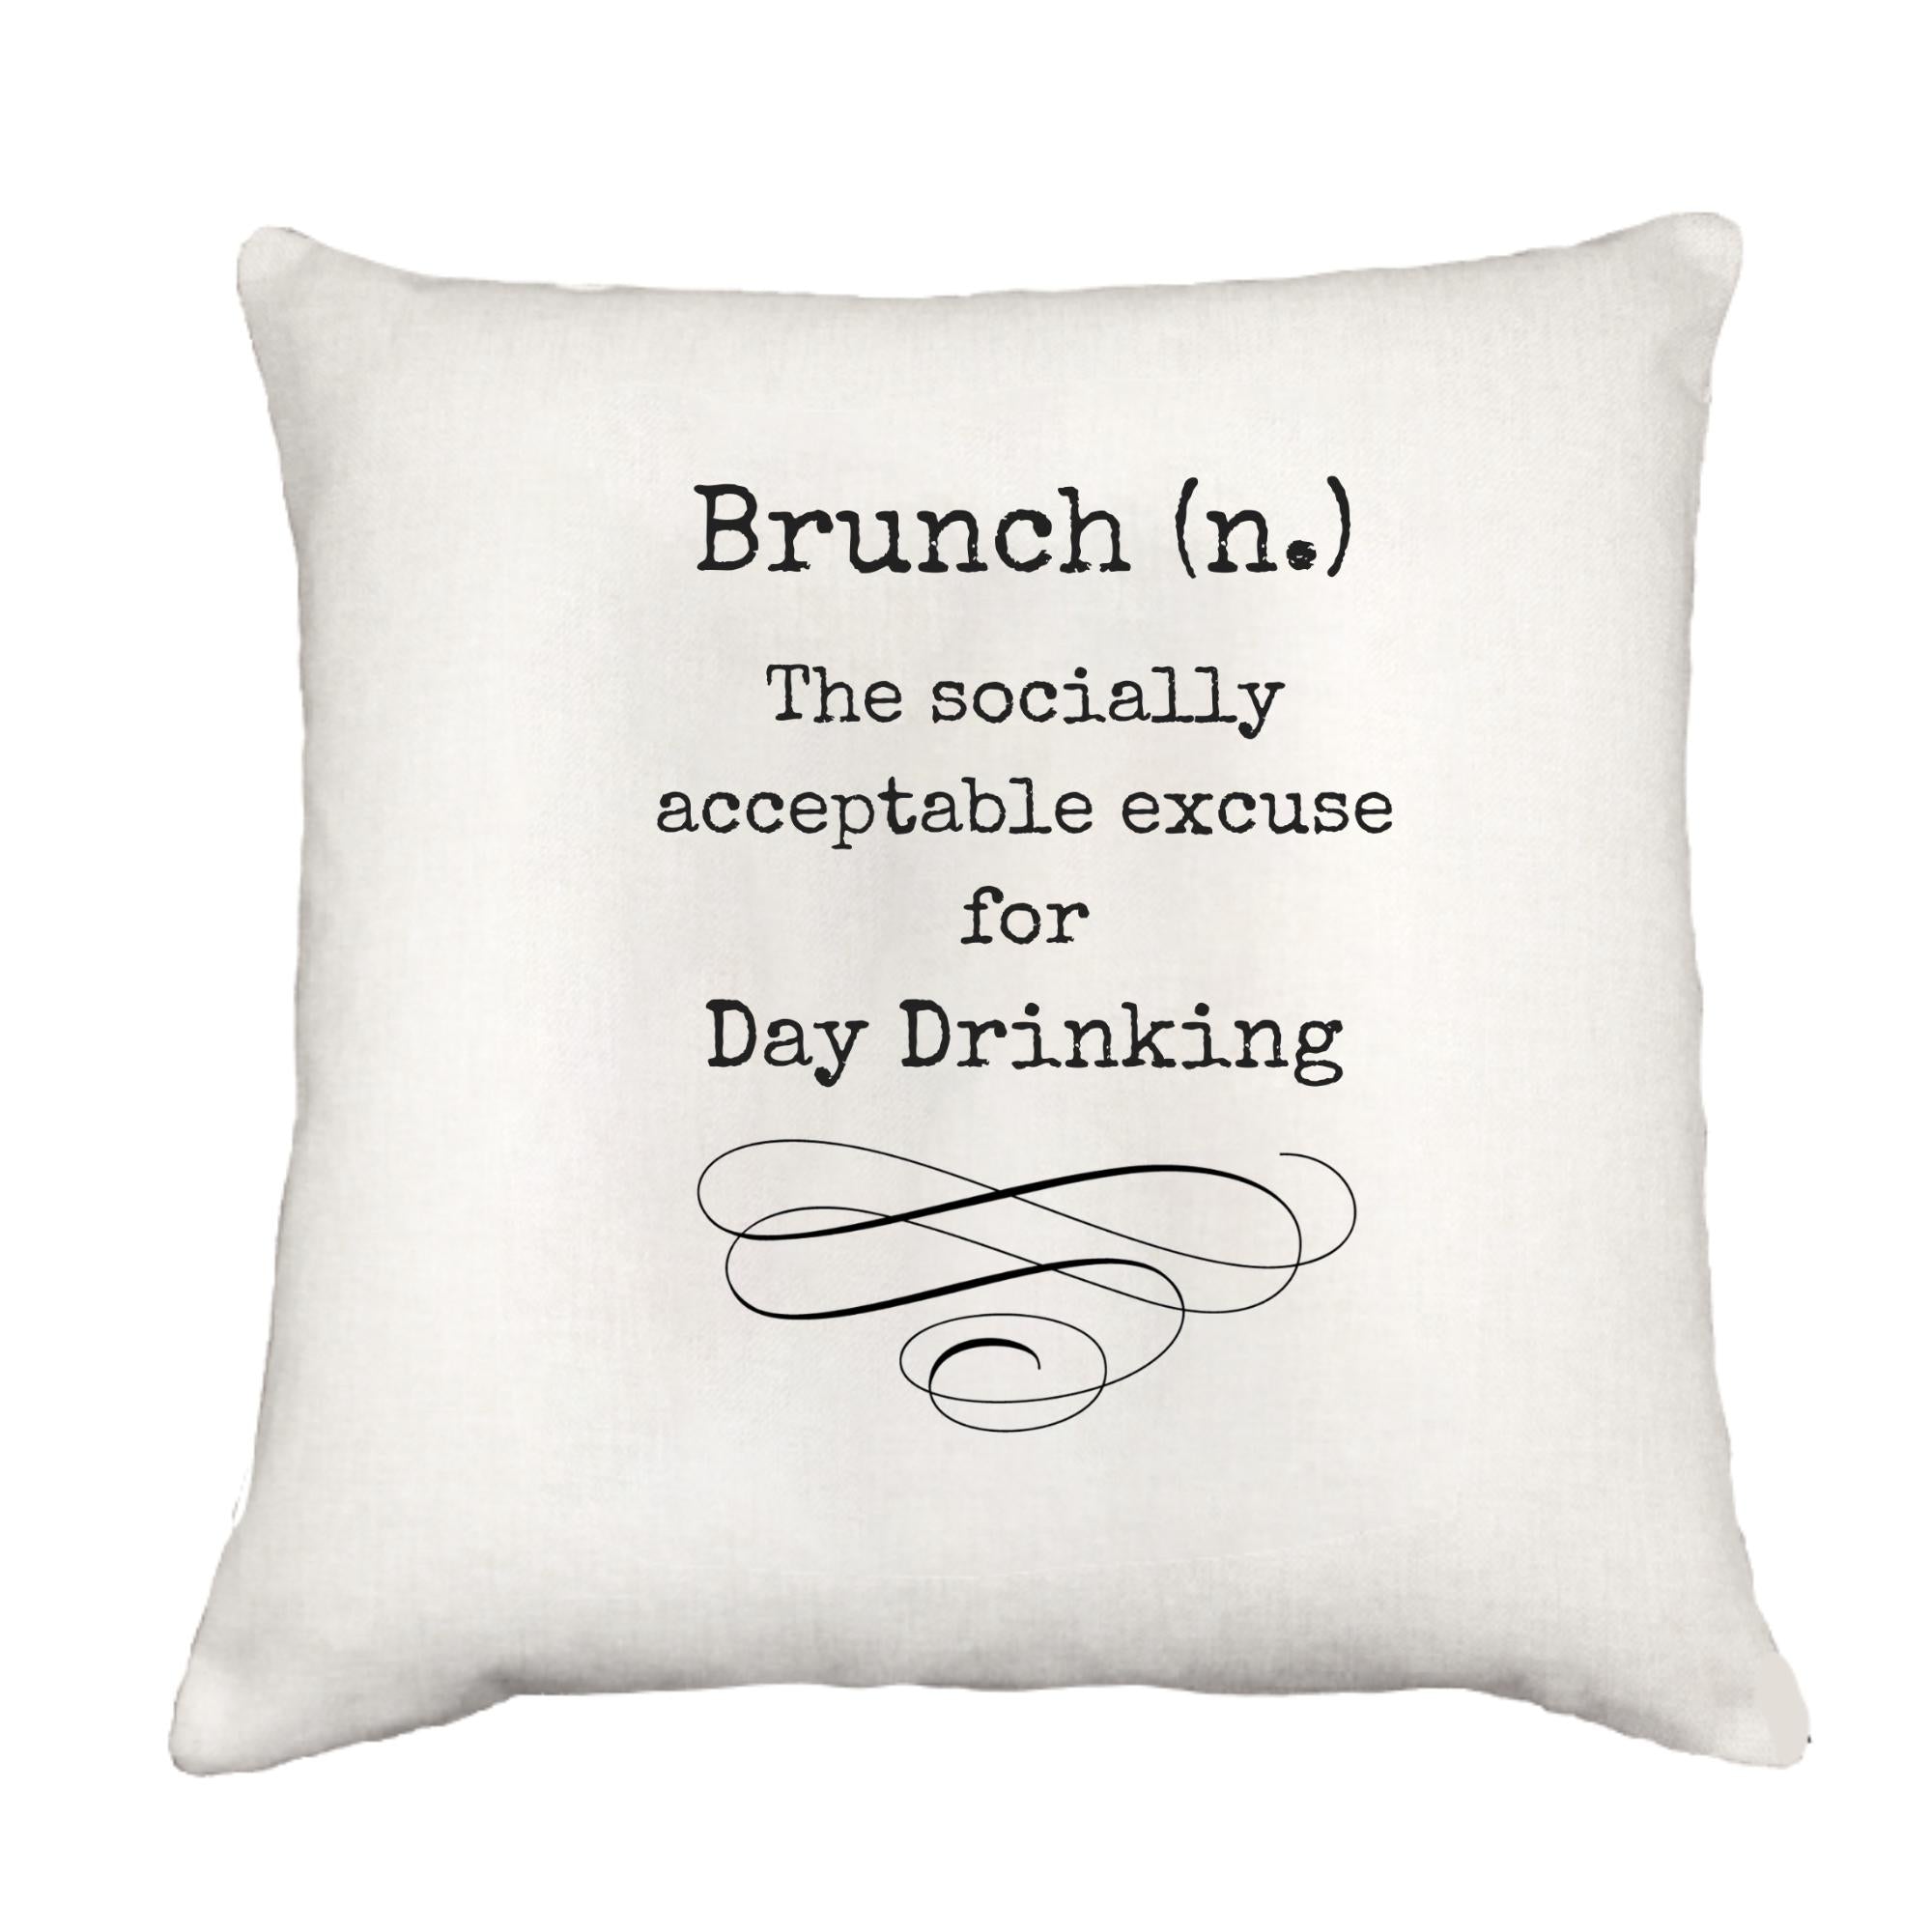 Brunch Cottage Pillow Throw/Decorative Pillow - Southern Sisters